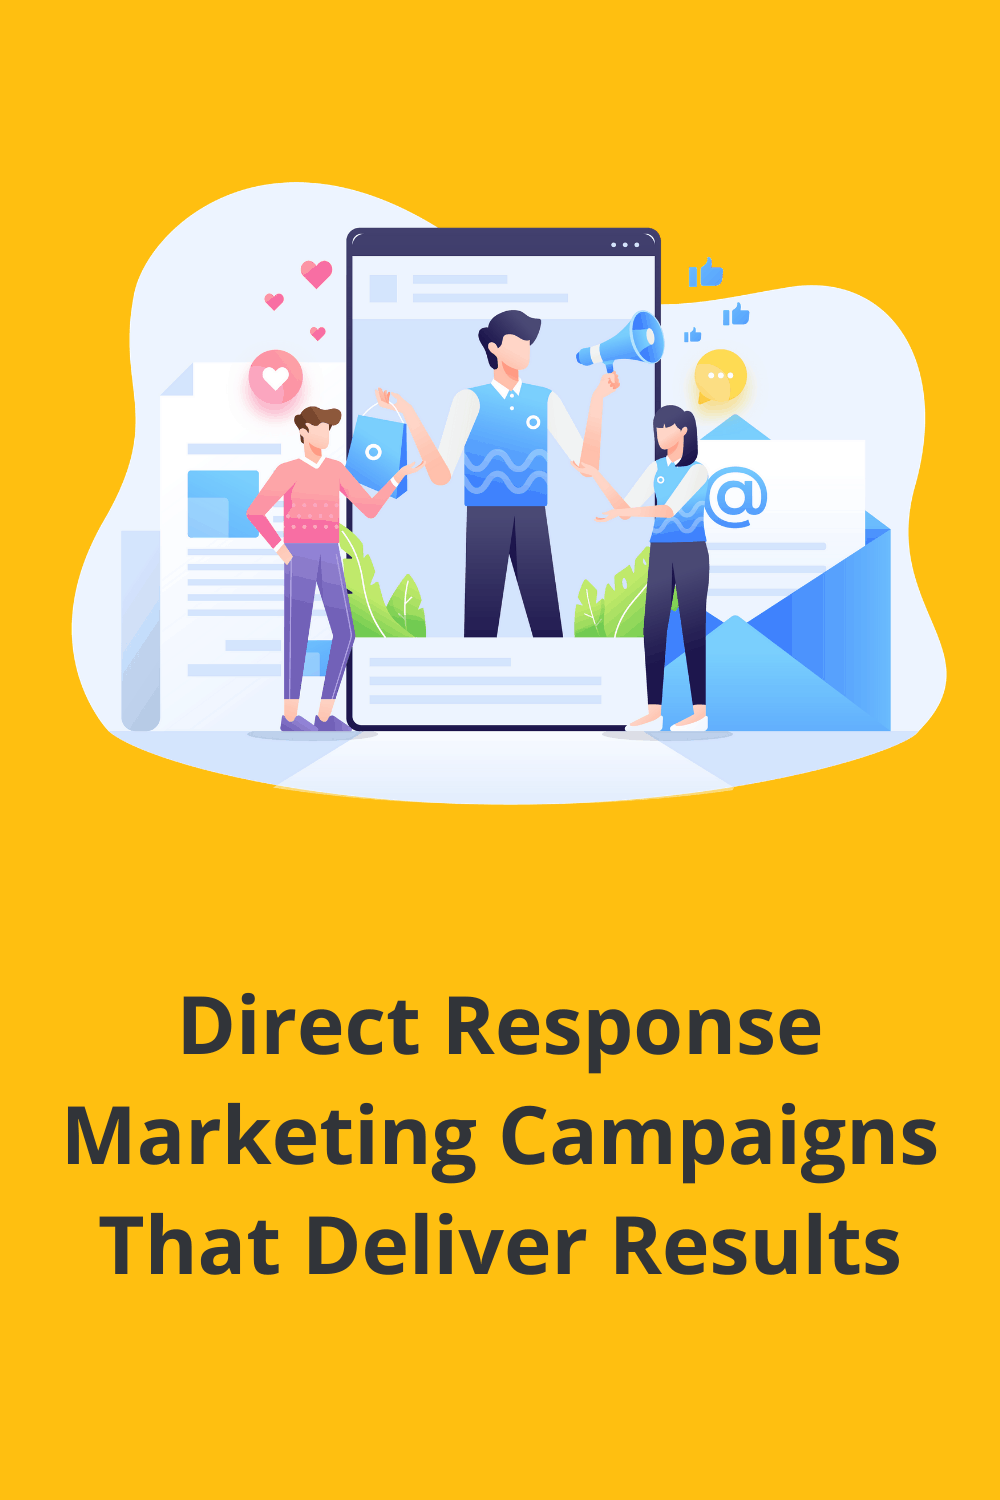 What does it take to create a direct response marketing campaign that delivers results? Here’s what you need to know. via @scopedesign